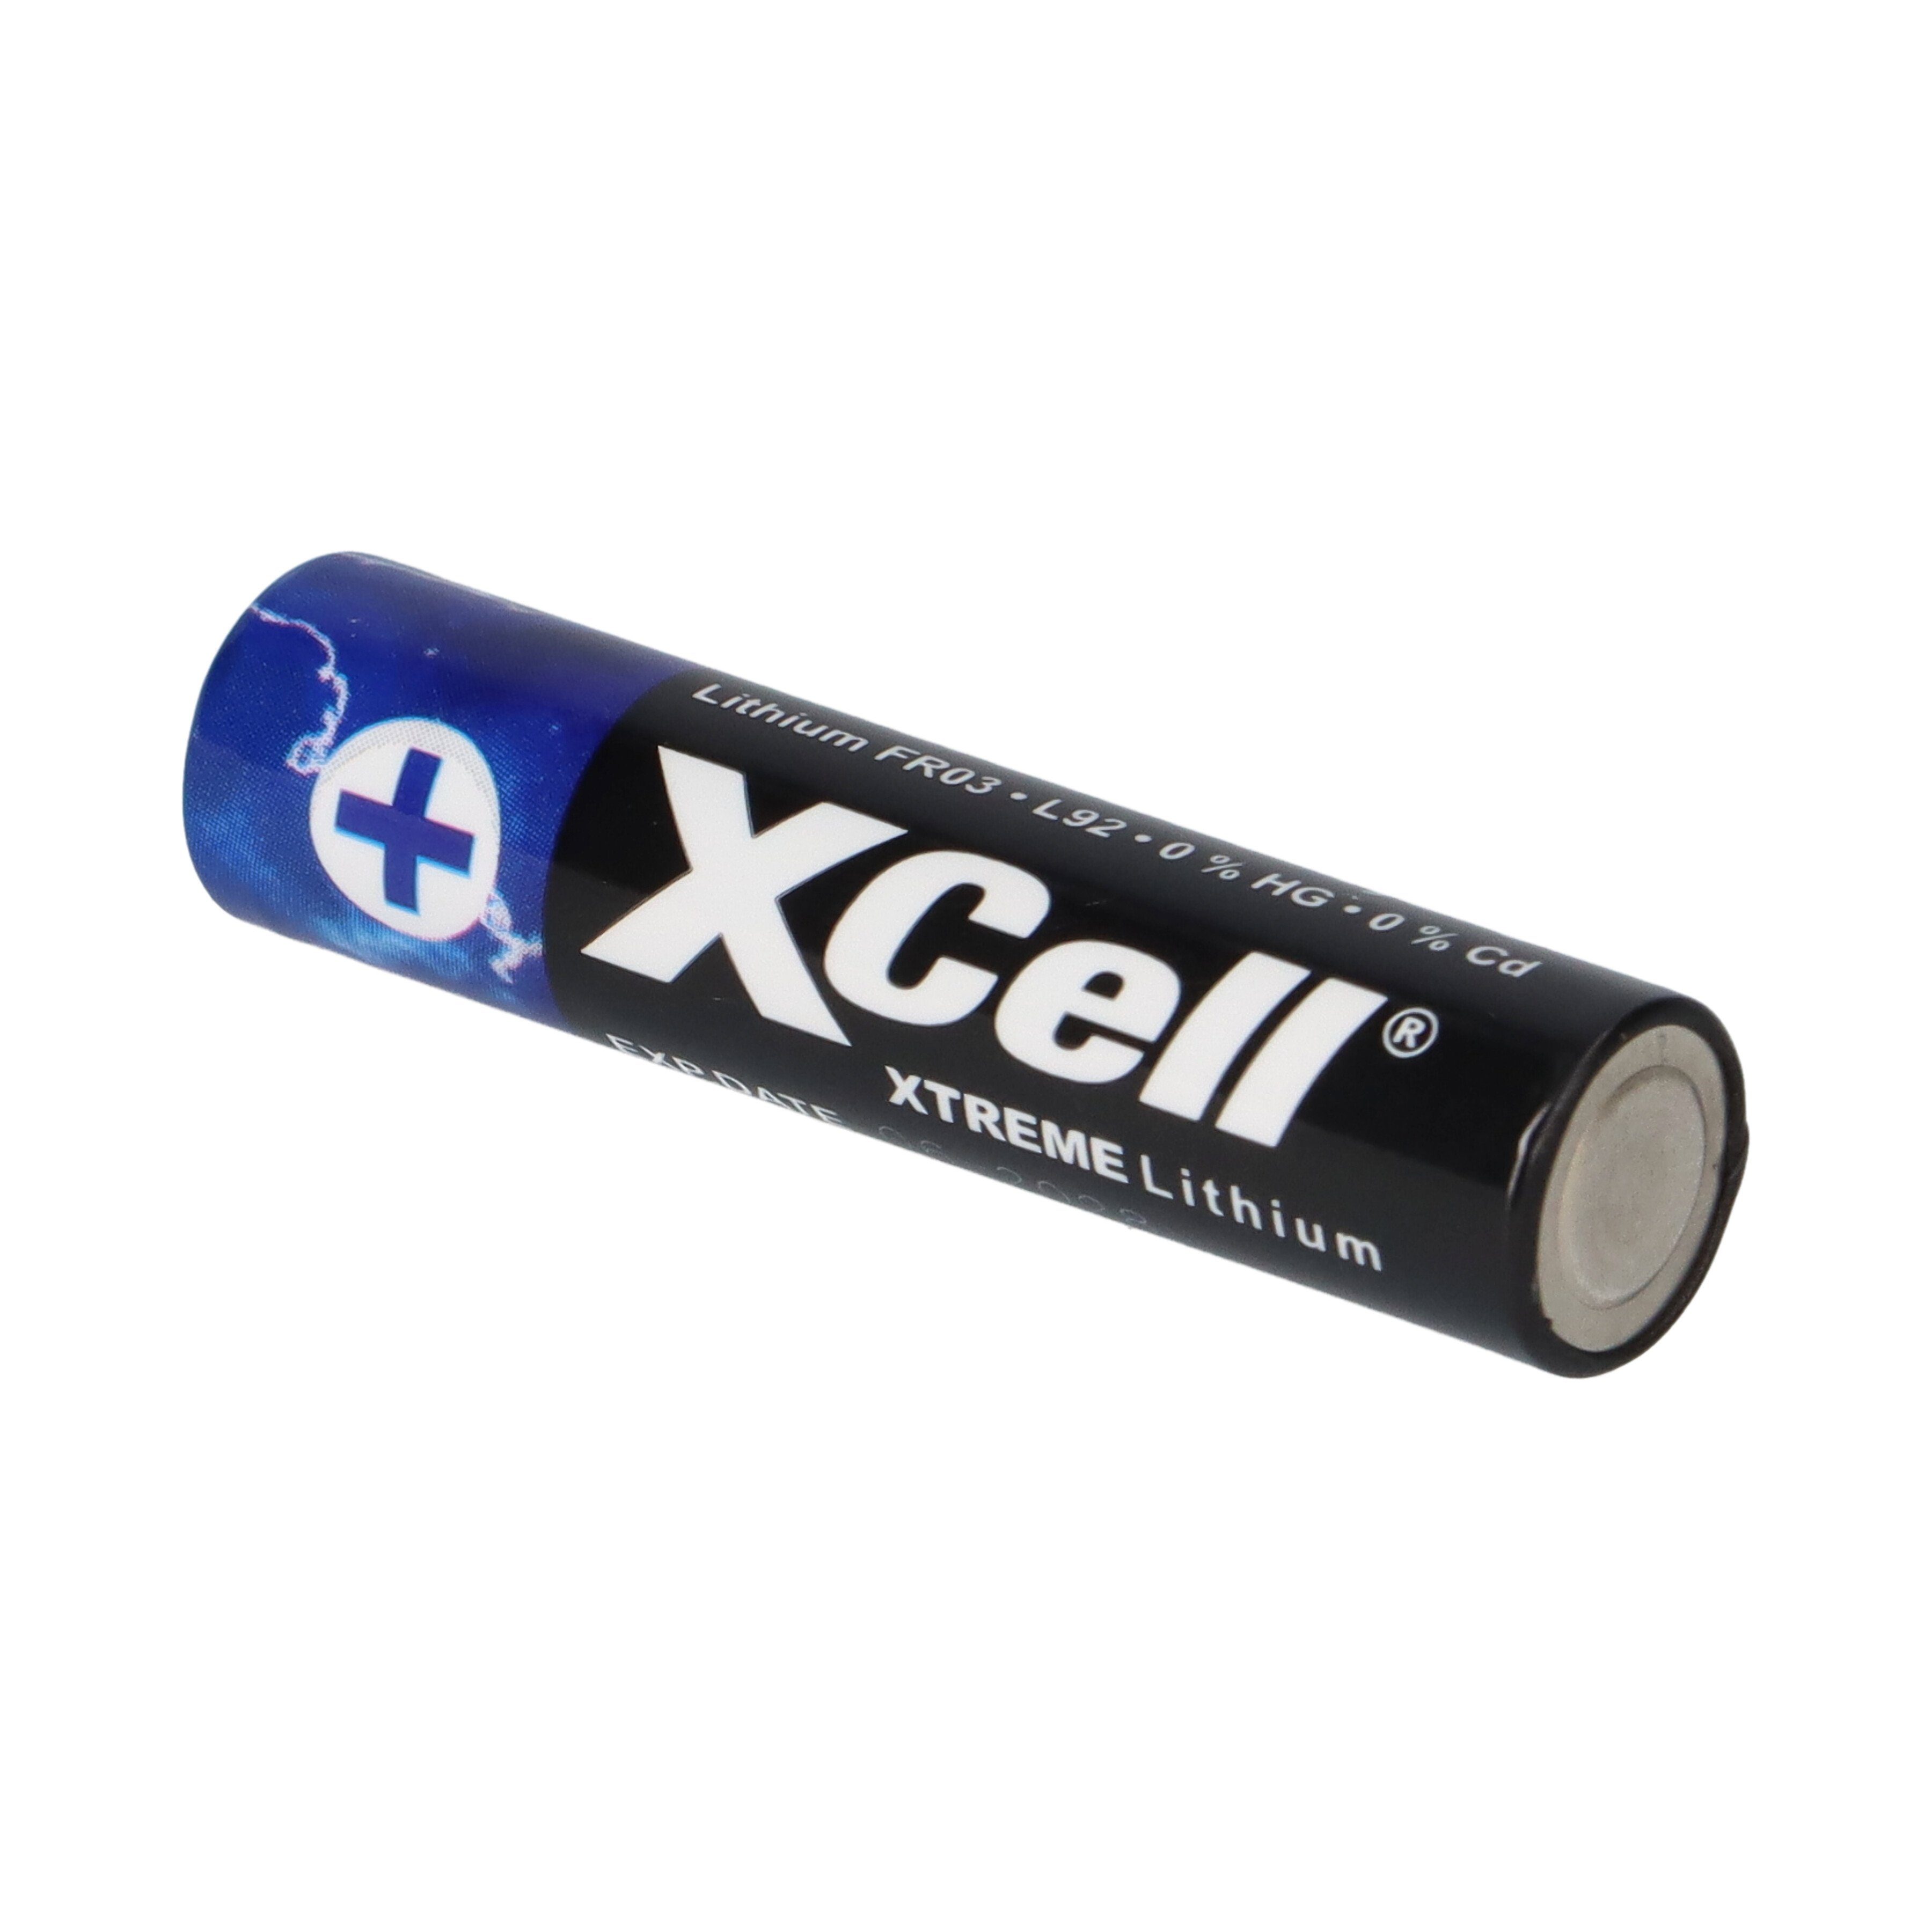 XCell XTREME Lithium FR03 Micro L92 AAA Blister Batterie Batterie 4er XCell